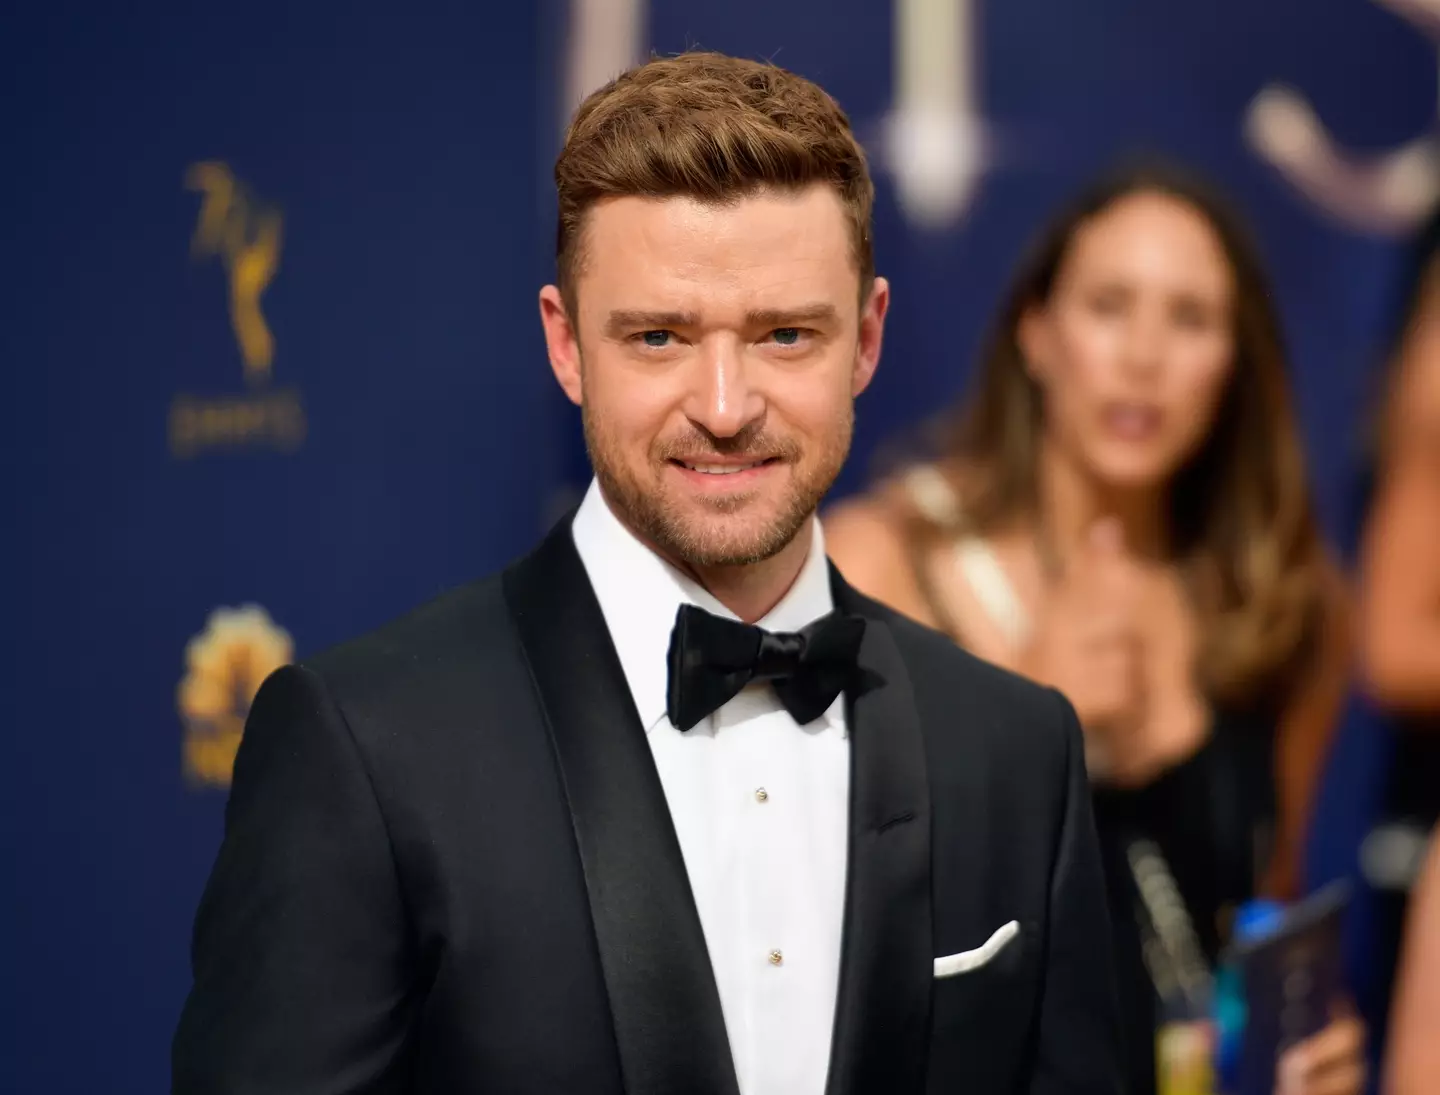 People have hit out at Timberlake for his remarks.